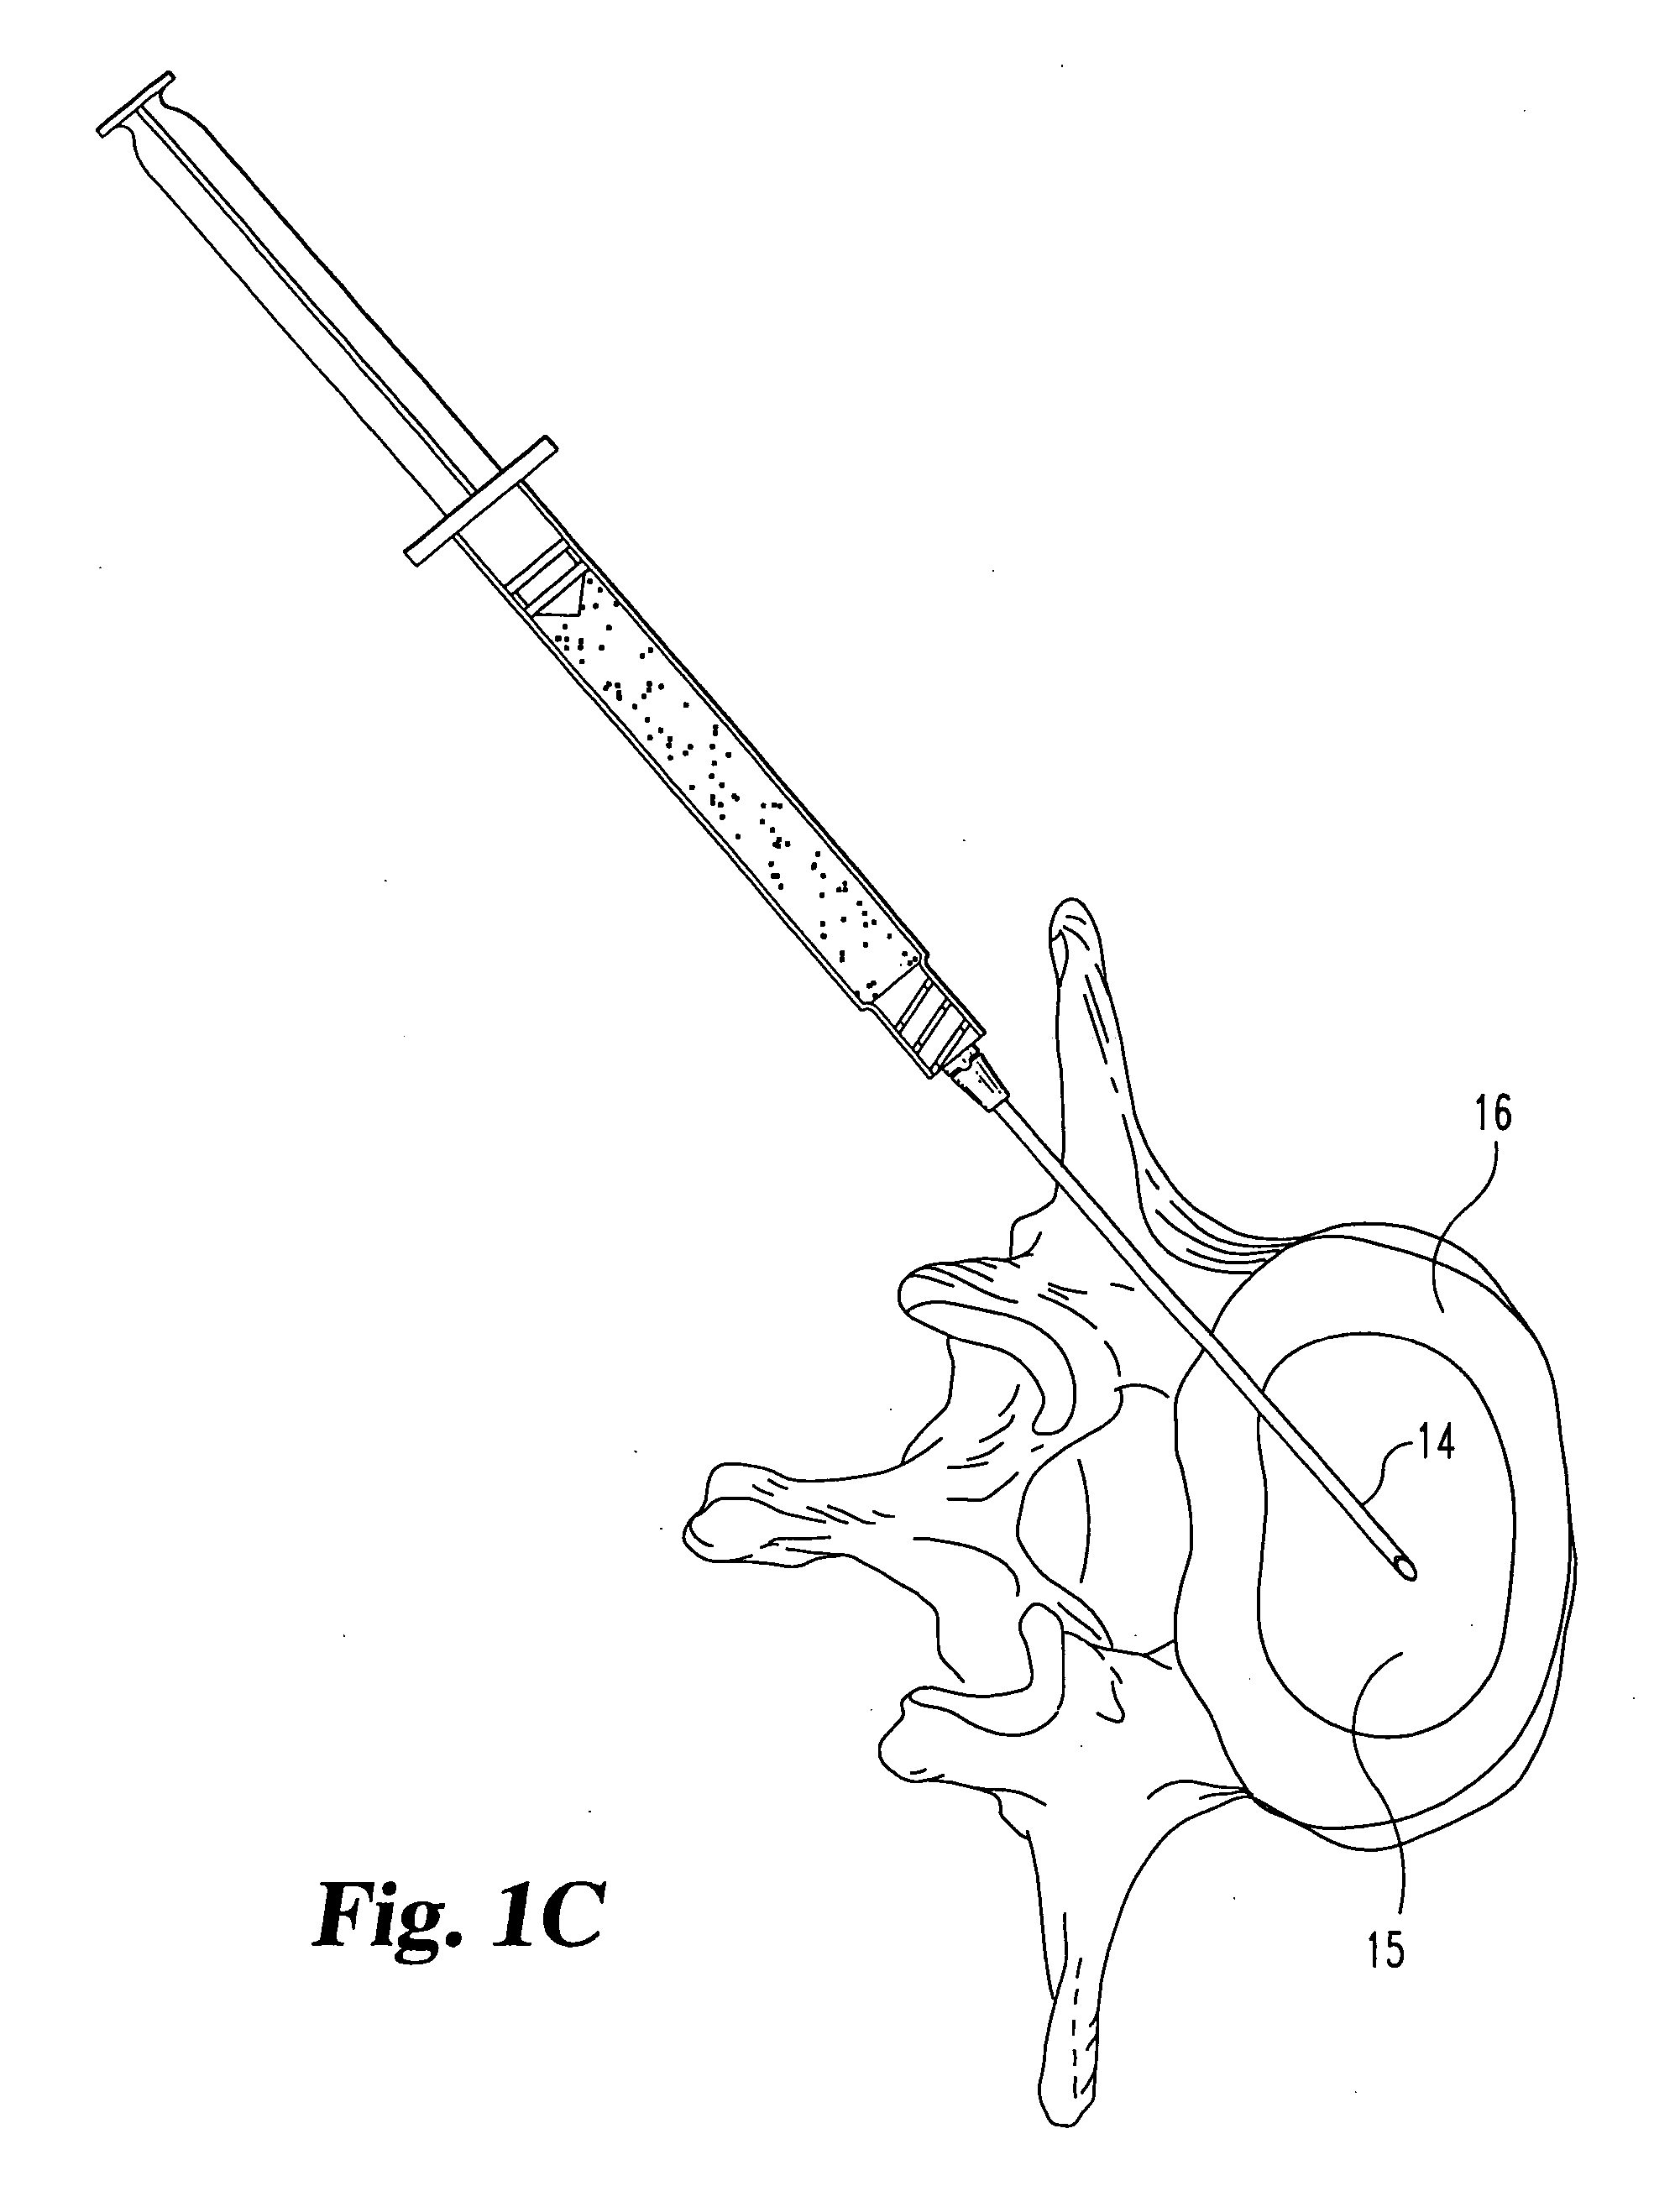 Collagen-based materials and methods for augmenting intervertebral discs